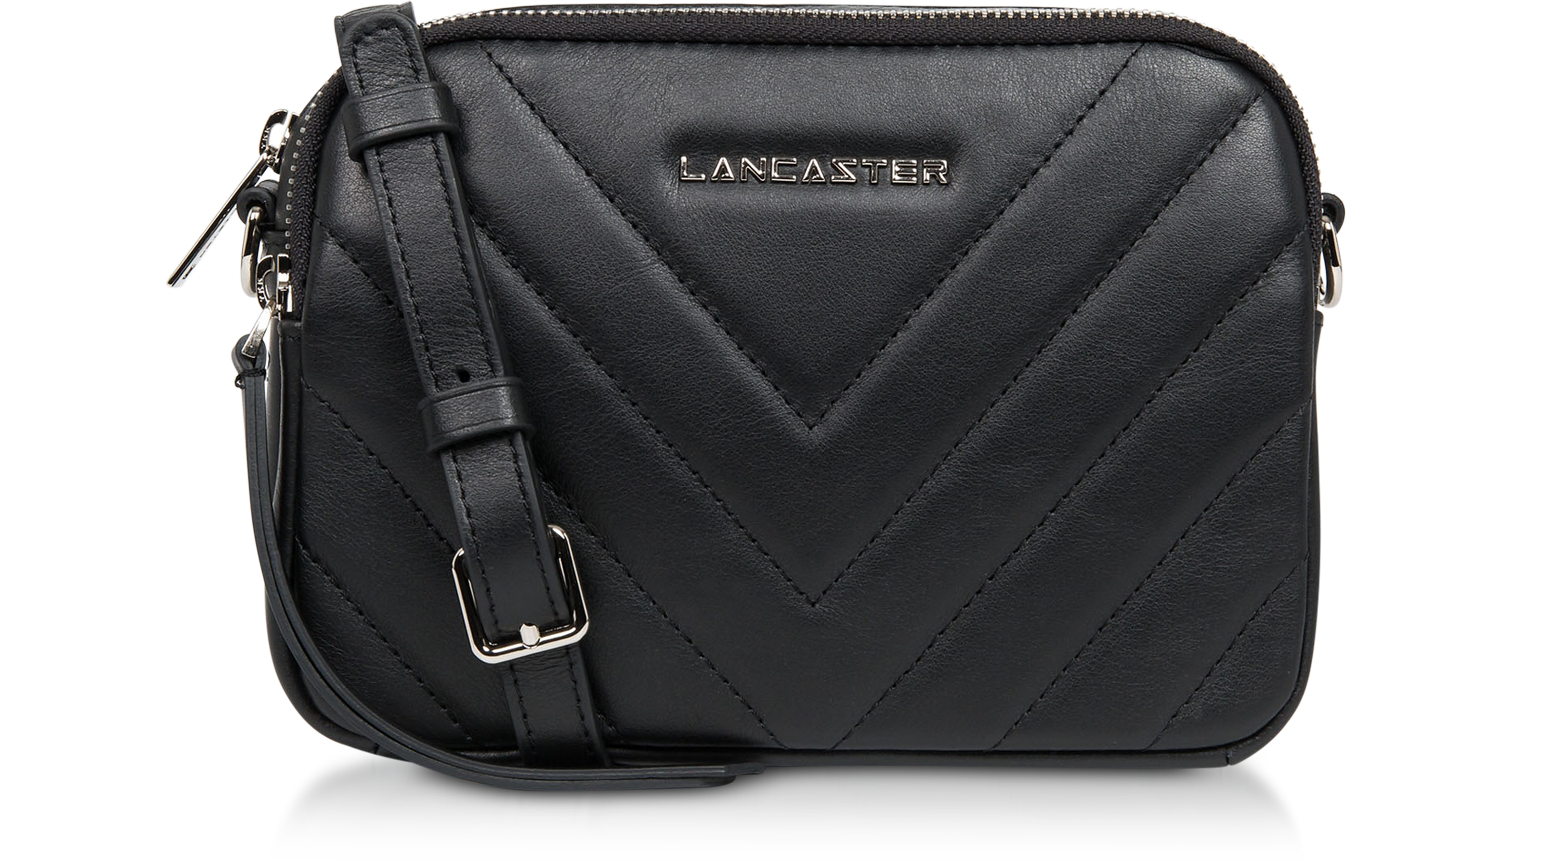 Small Grain Leather Quilted Shoulder and Crossbody Bag